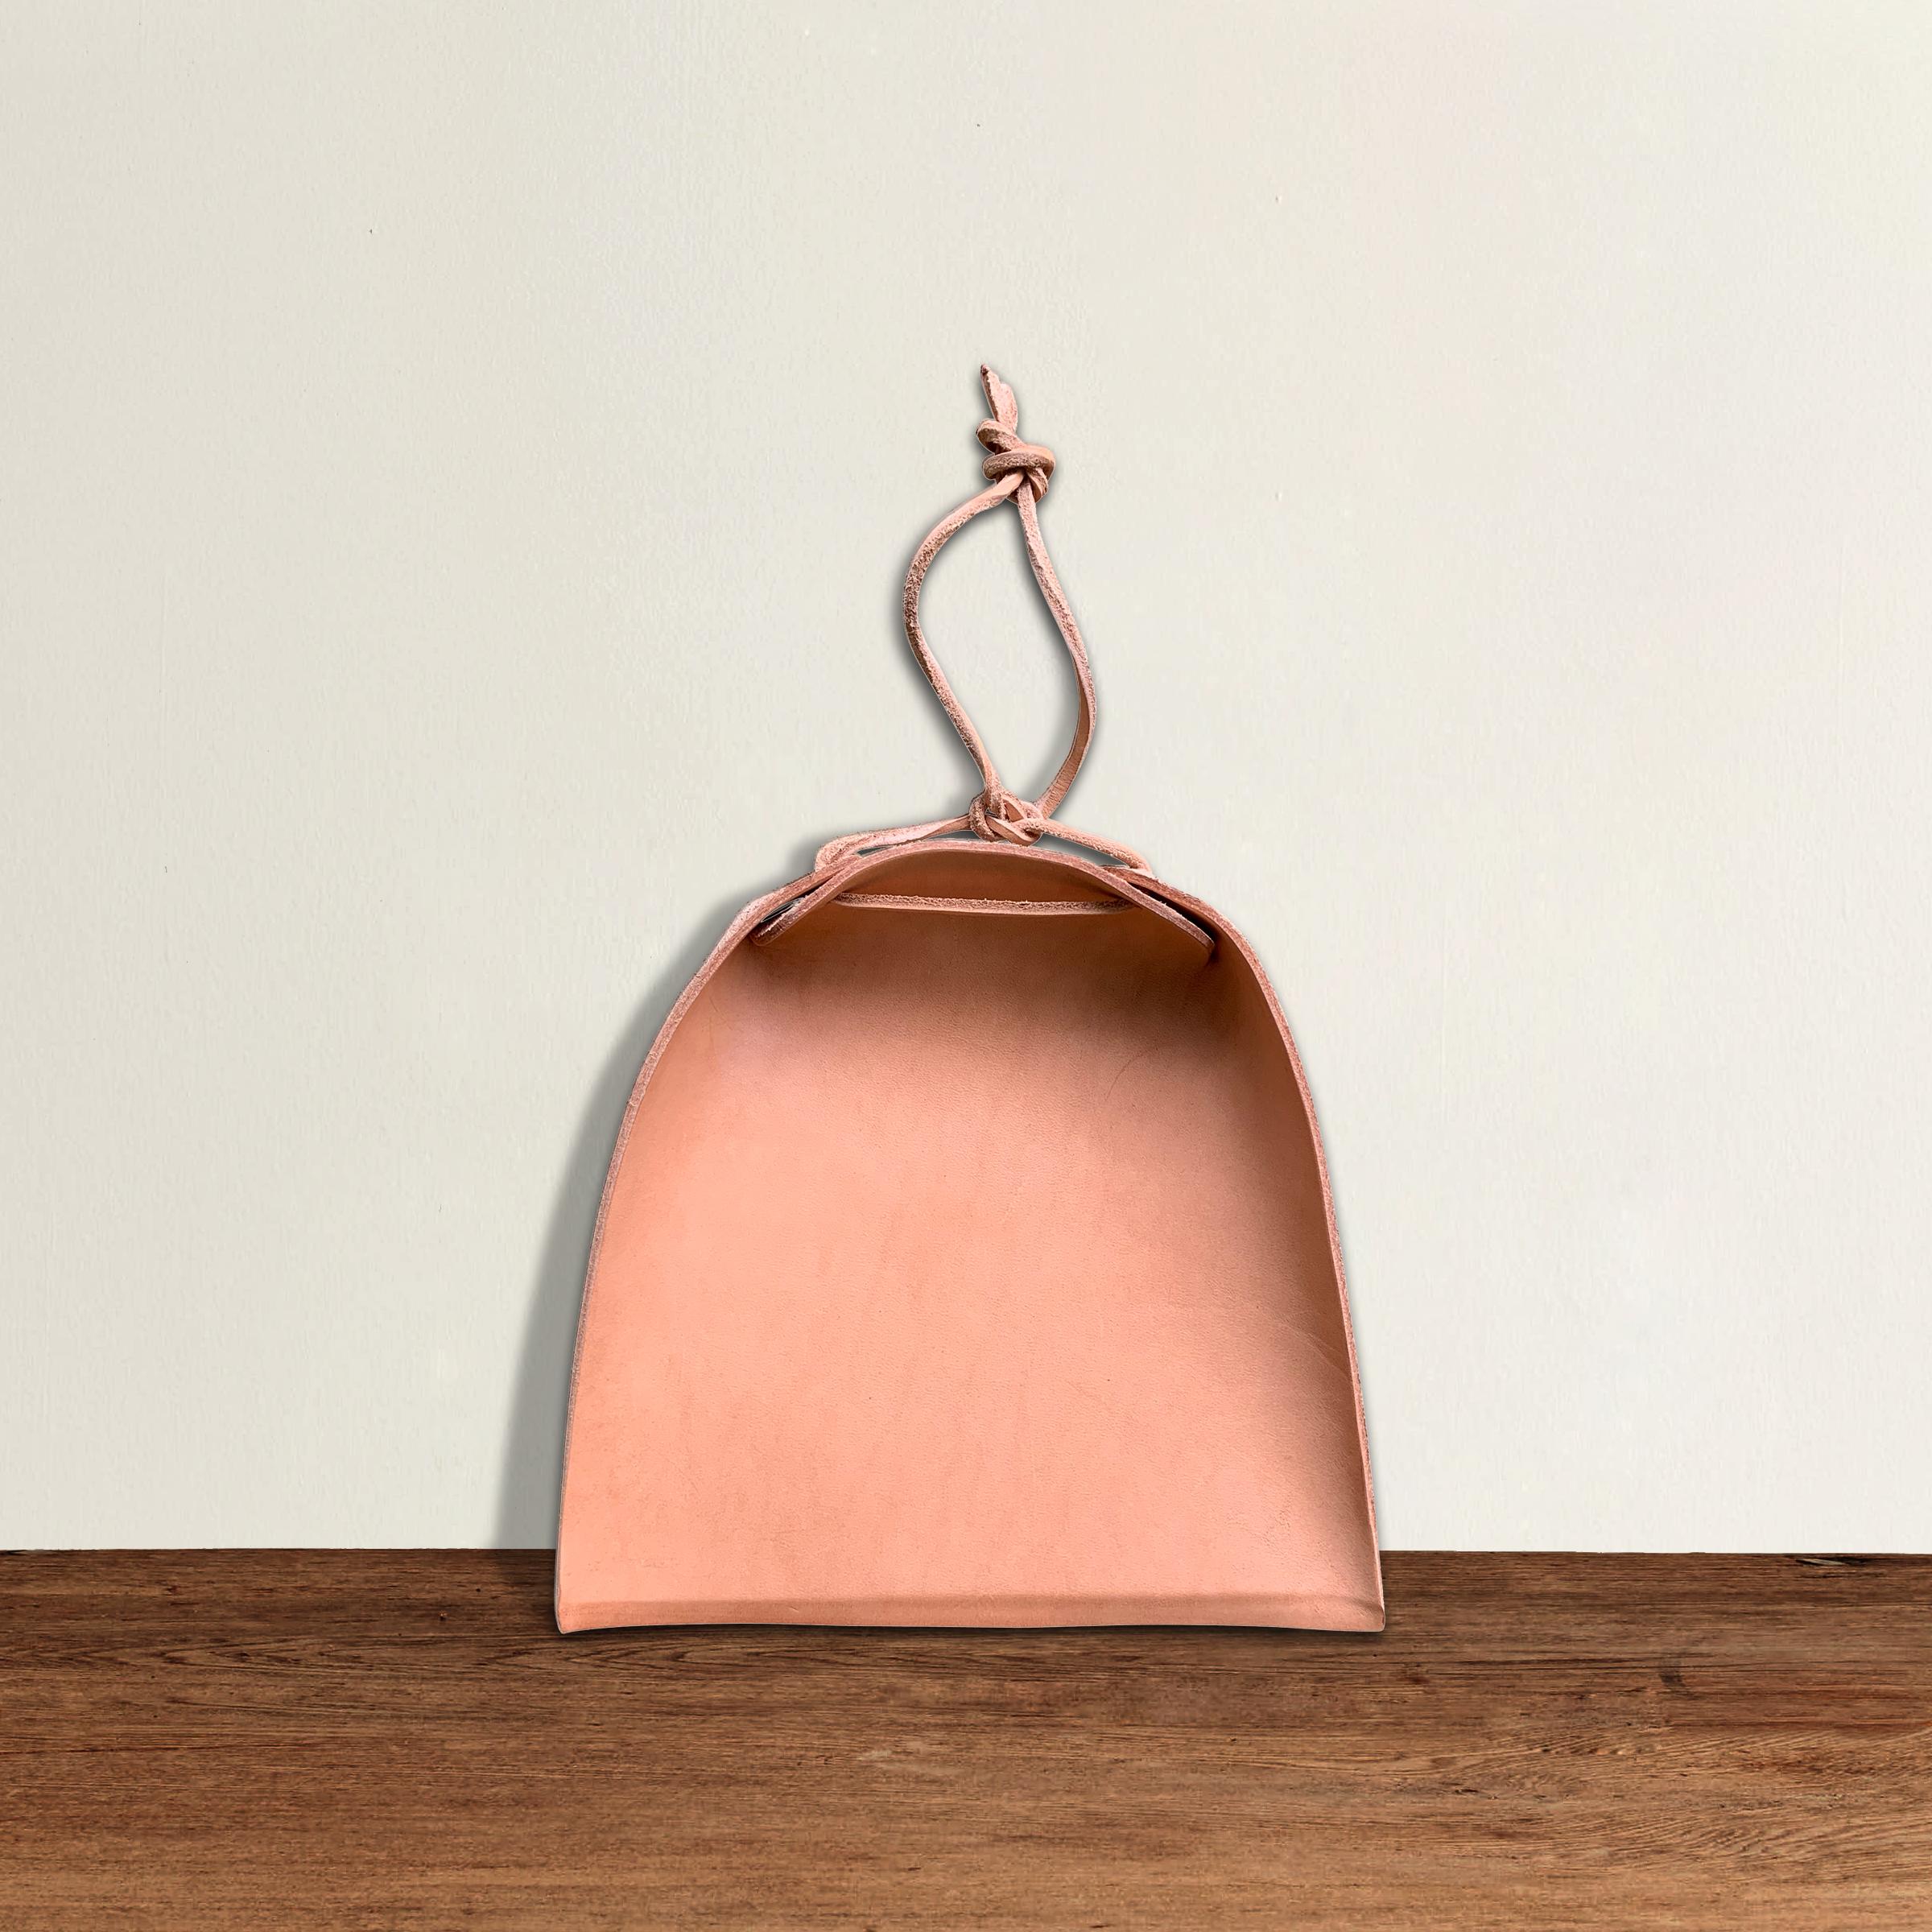 Handmade by artisans in rural Kentucky, our Right Proper leather dustpan was crafted with shaker design principles in mind: “Don't make something unless it is both necessary and useful; and if it is both necessary and useful, then make it